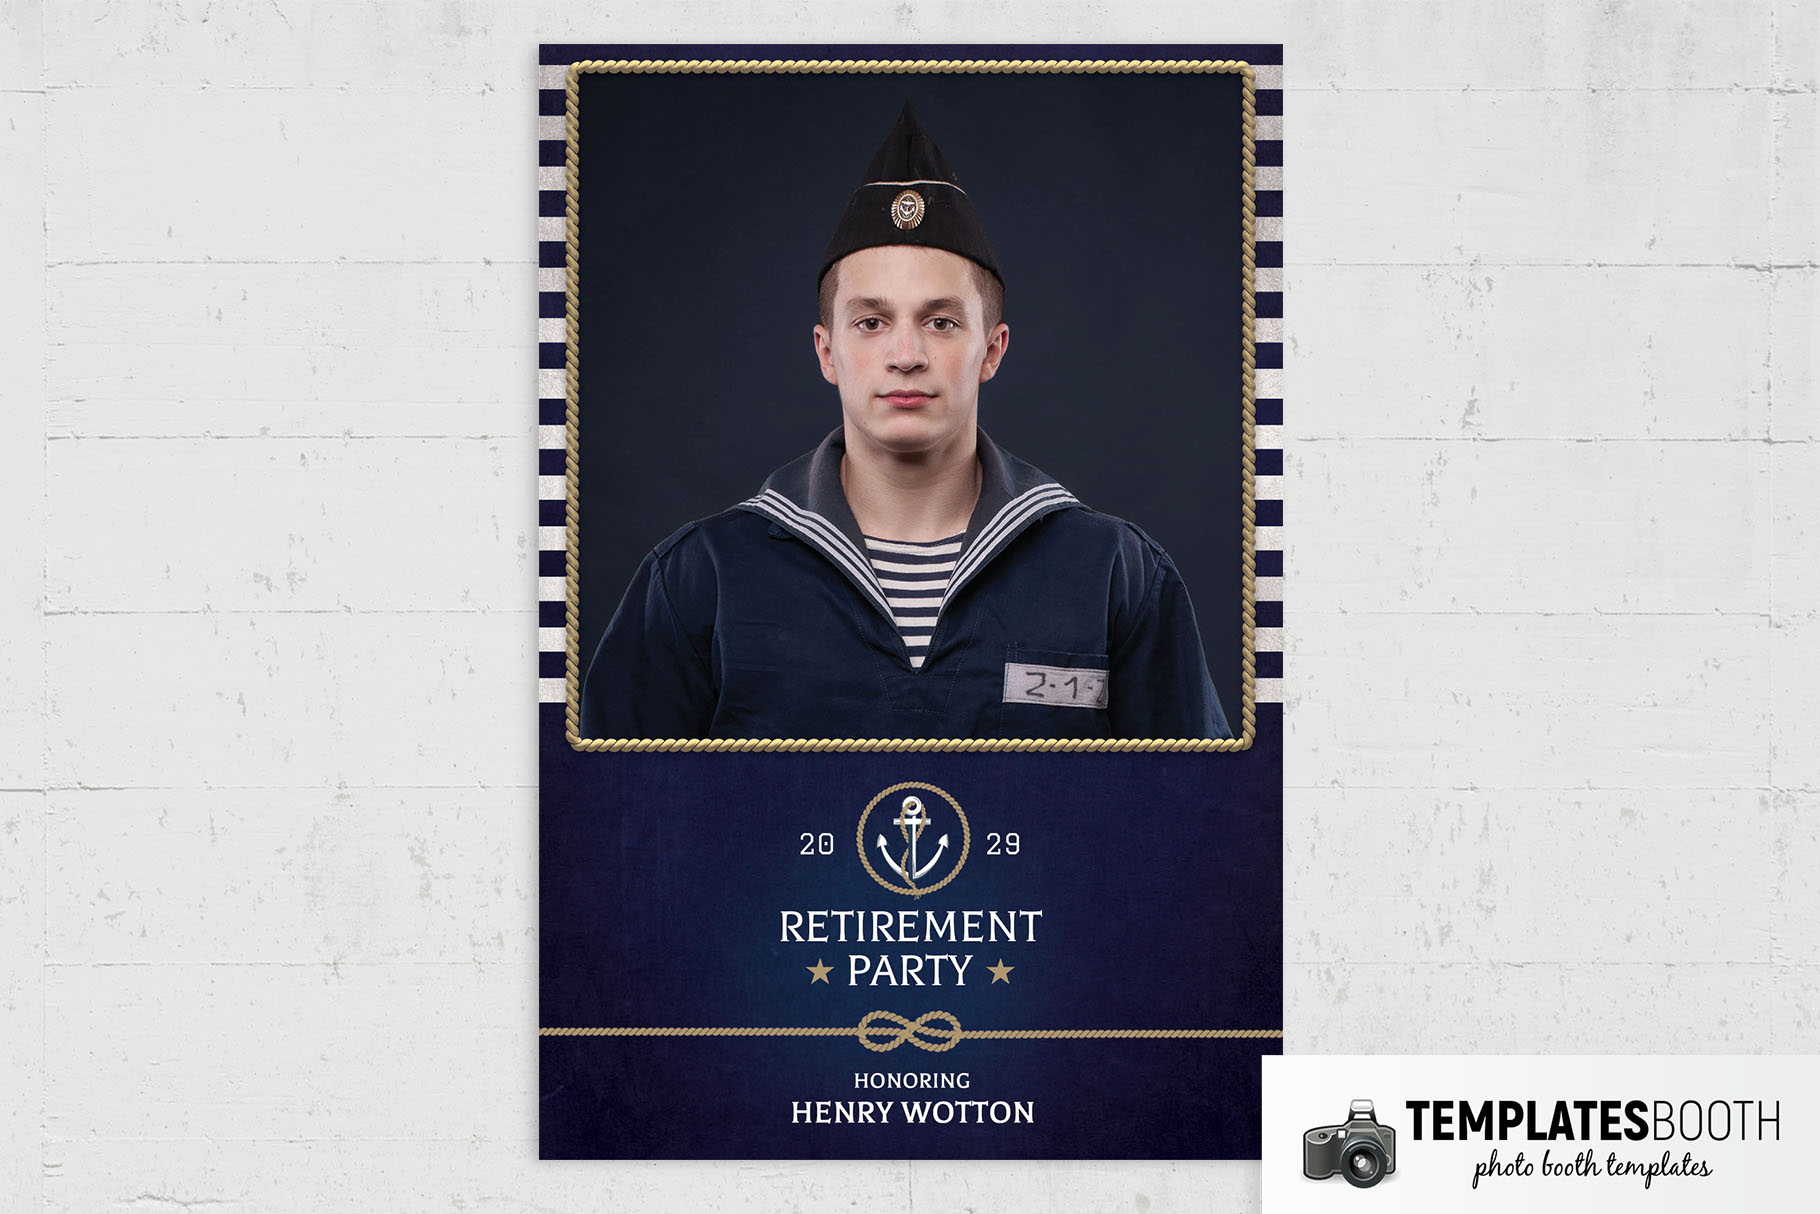 Navy Sailor Photo Booth Template